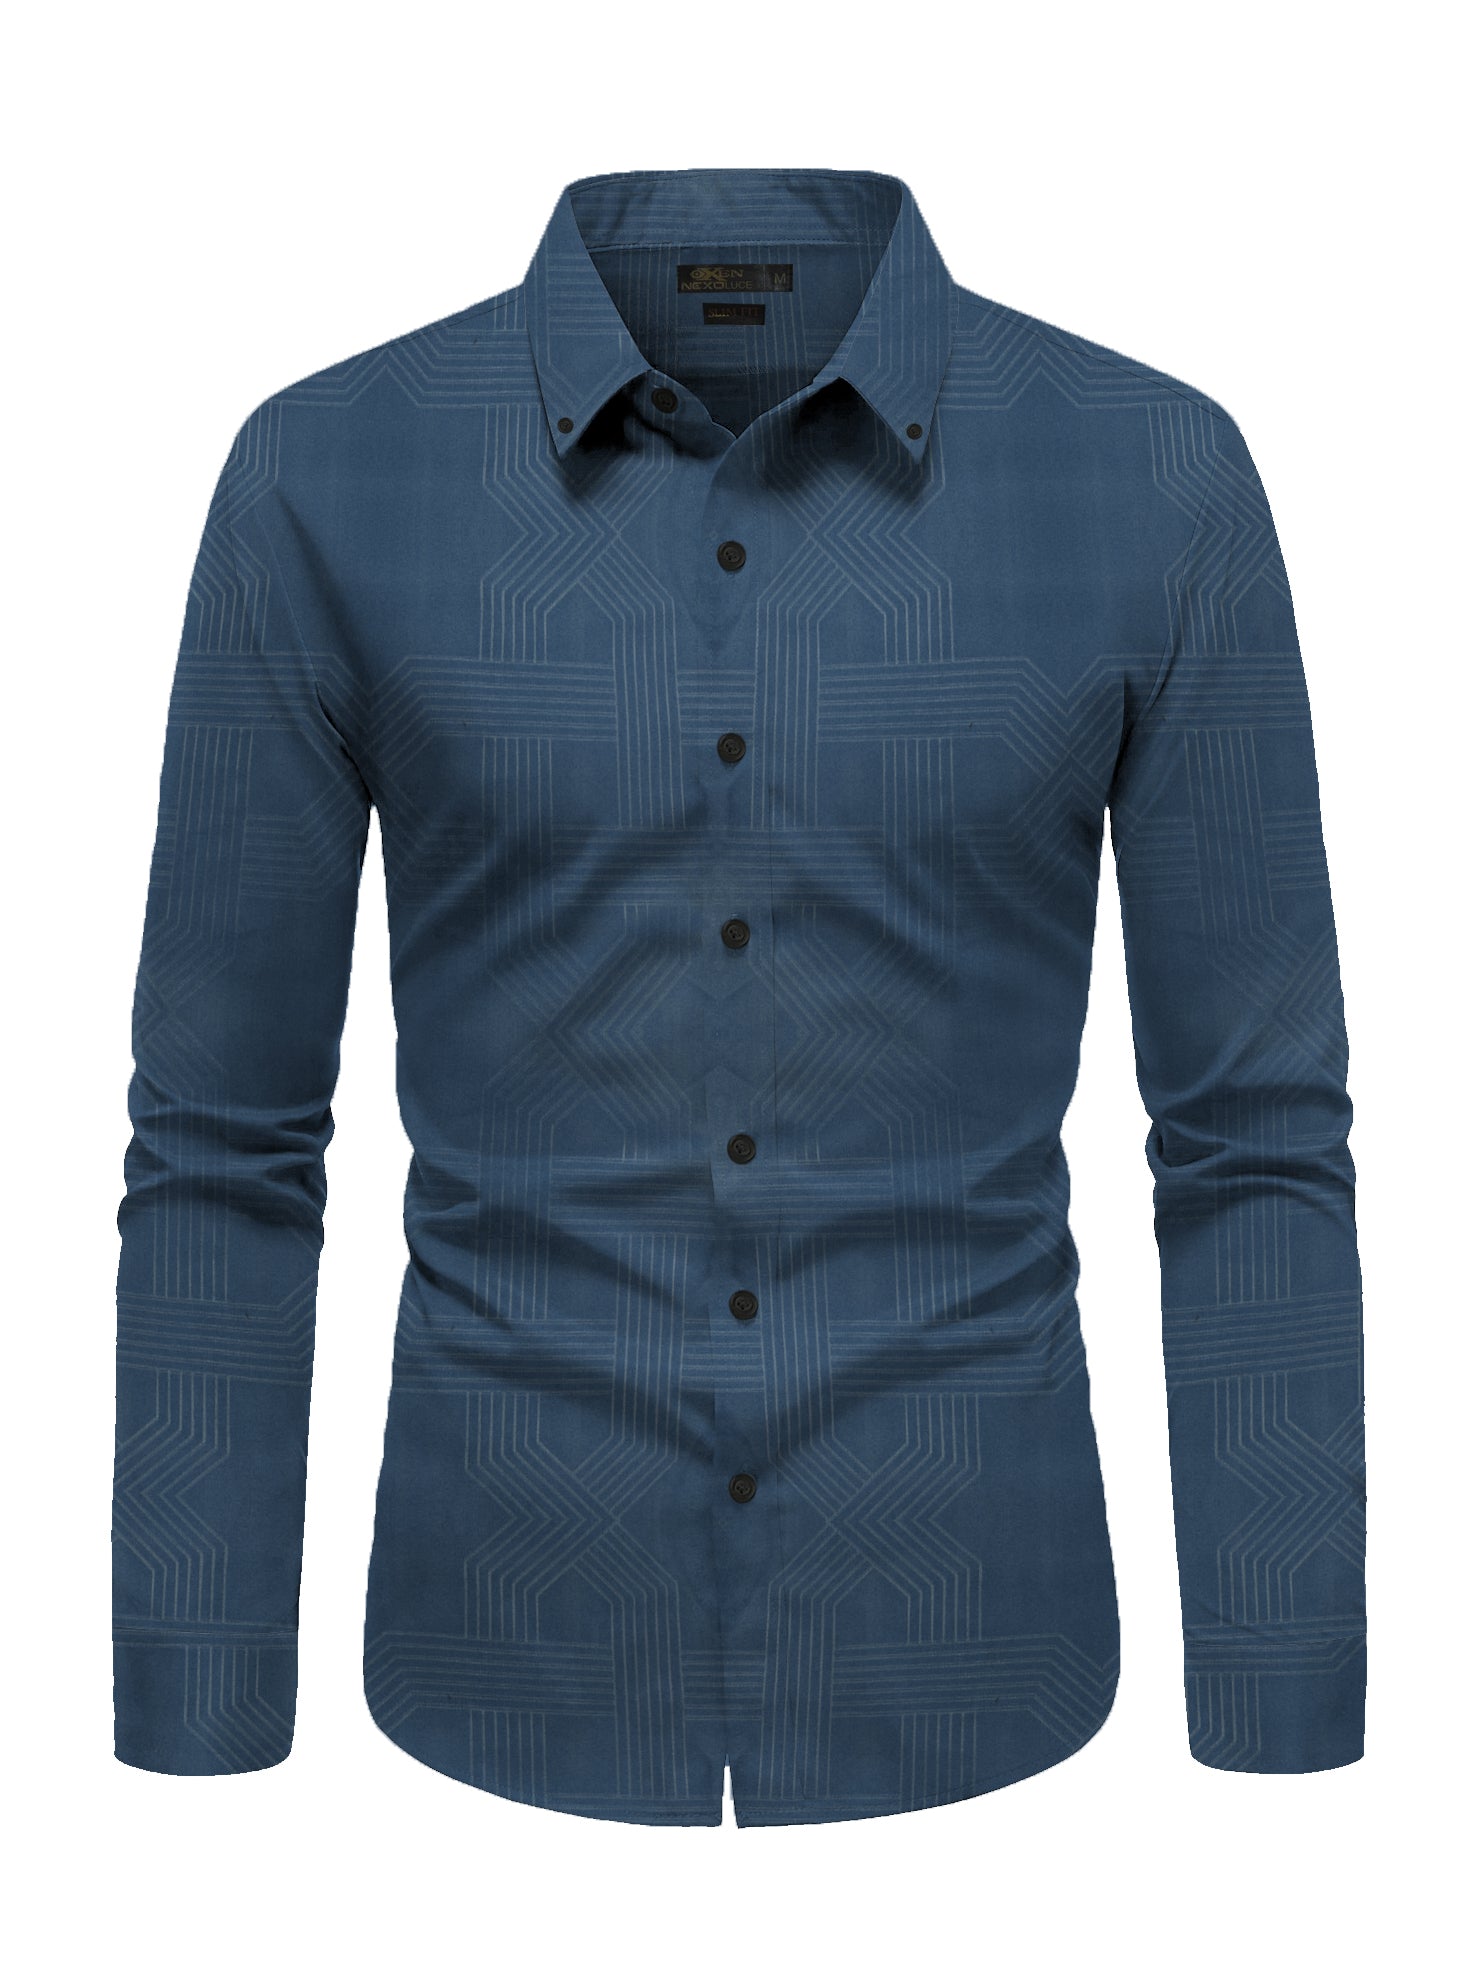 Oxen Nexoluce Premium Slim Fit Casual Shirt For Men-Prussian Blue with Texture-BE1188